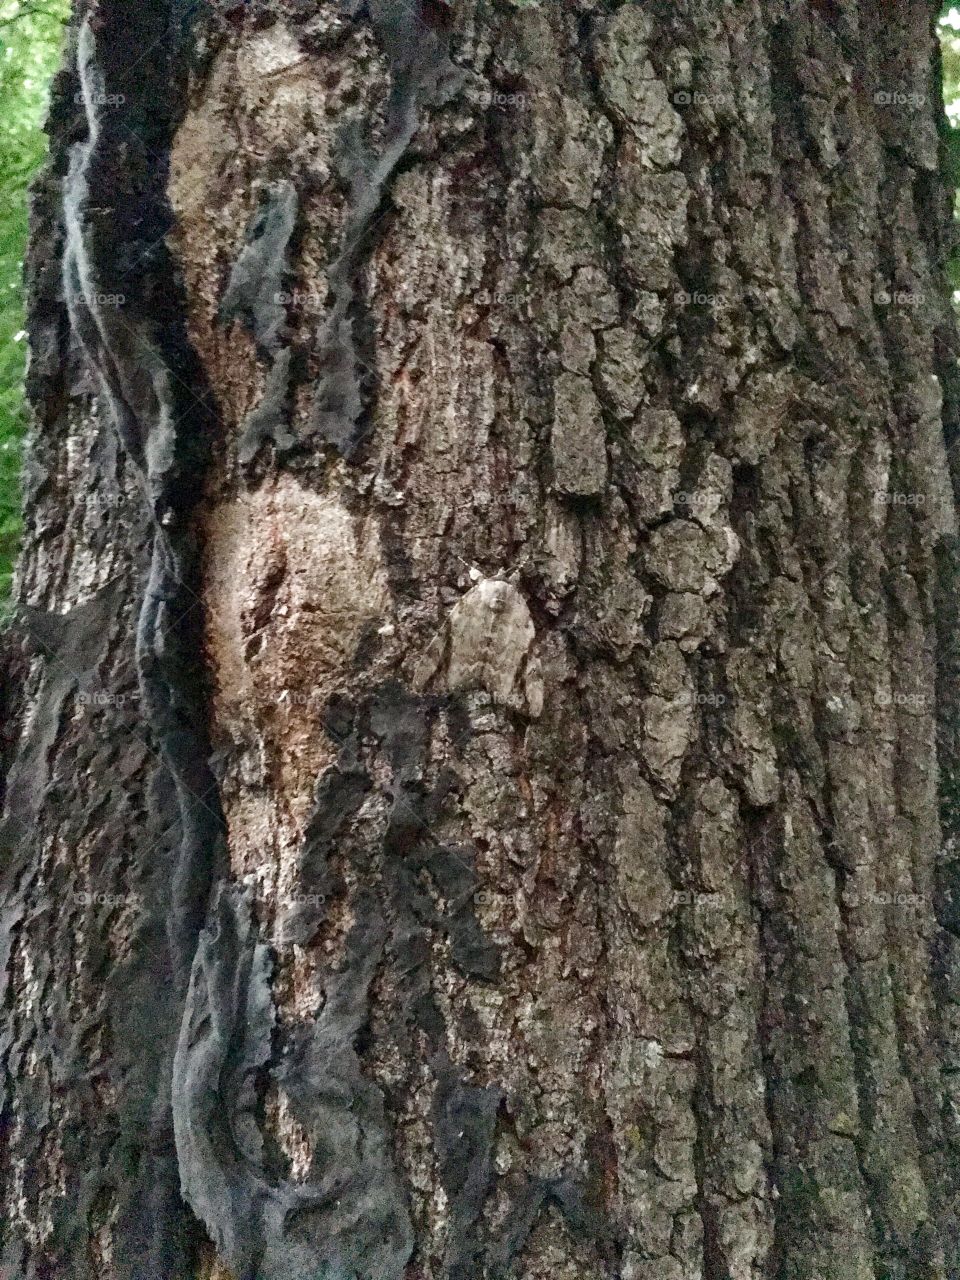 Moth in camouflage on tree trunk